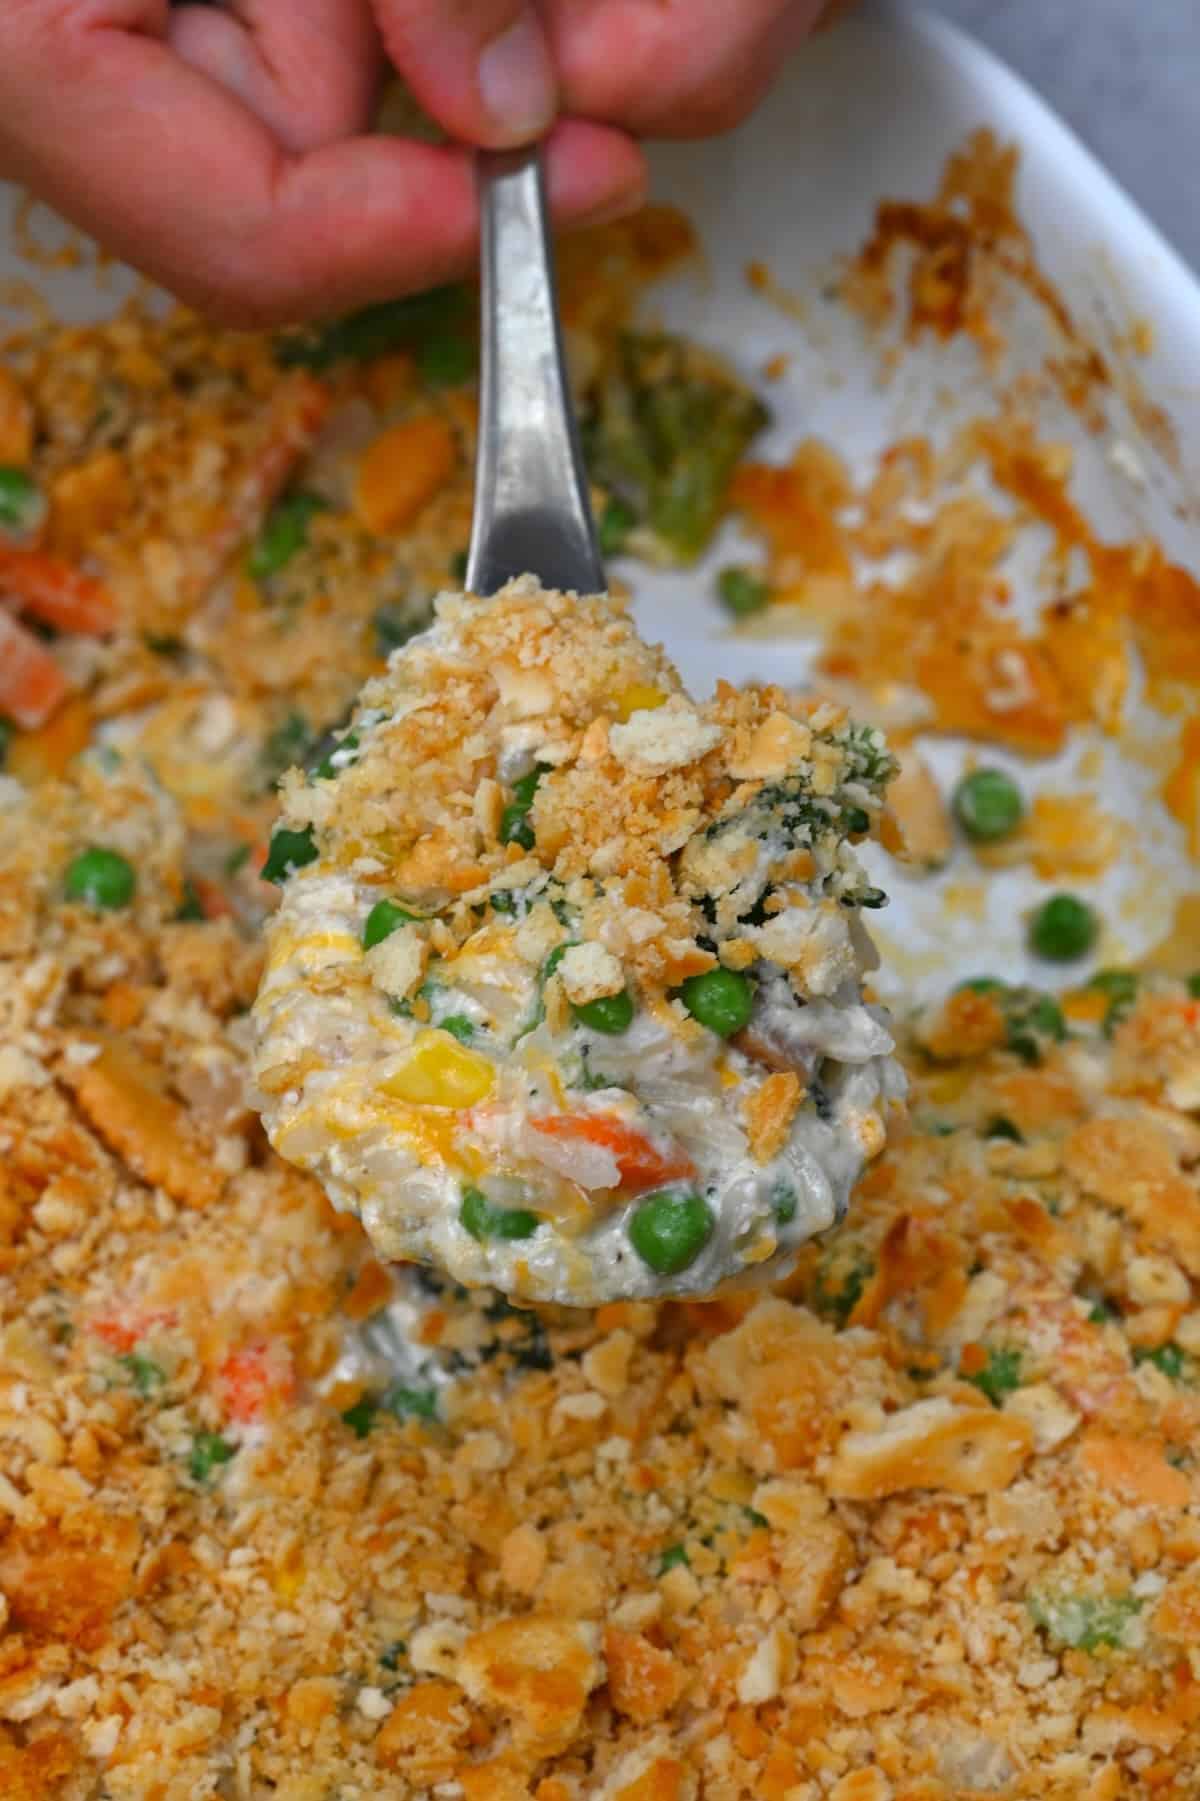 A spoonful of vegetable casserole